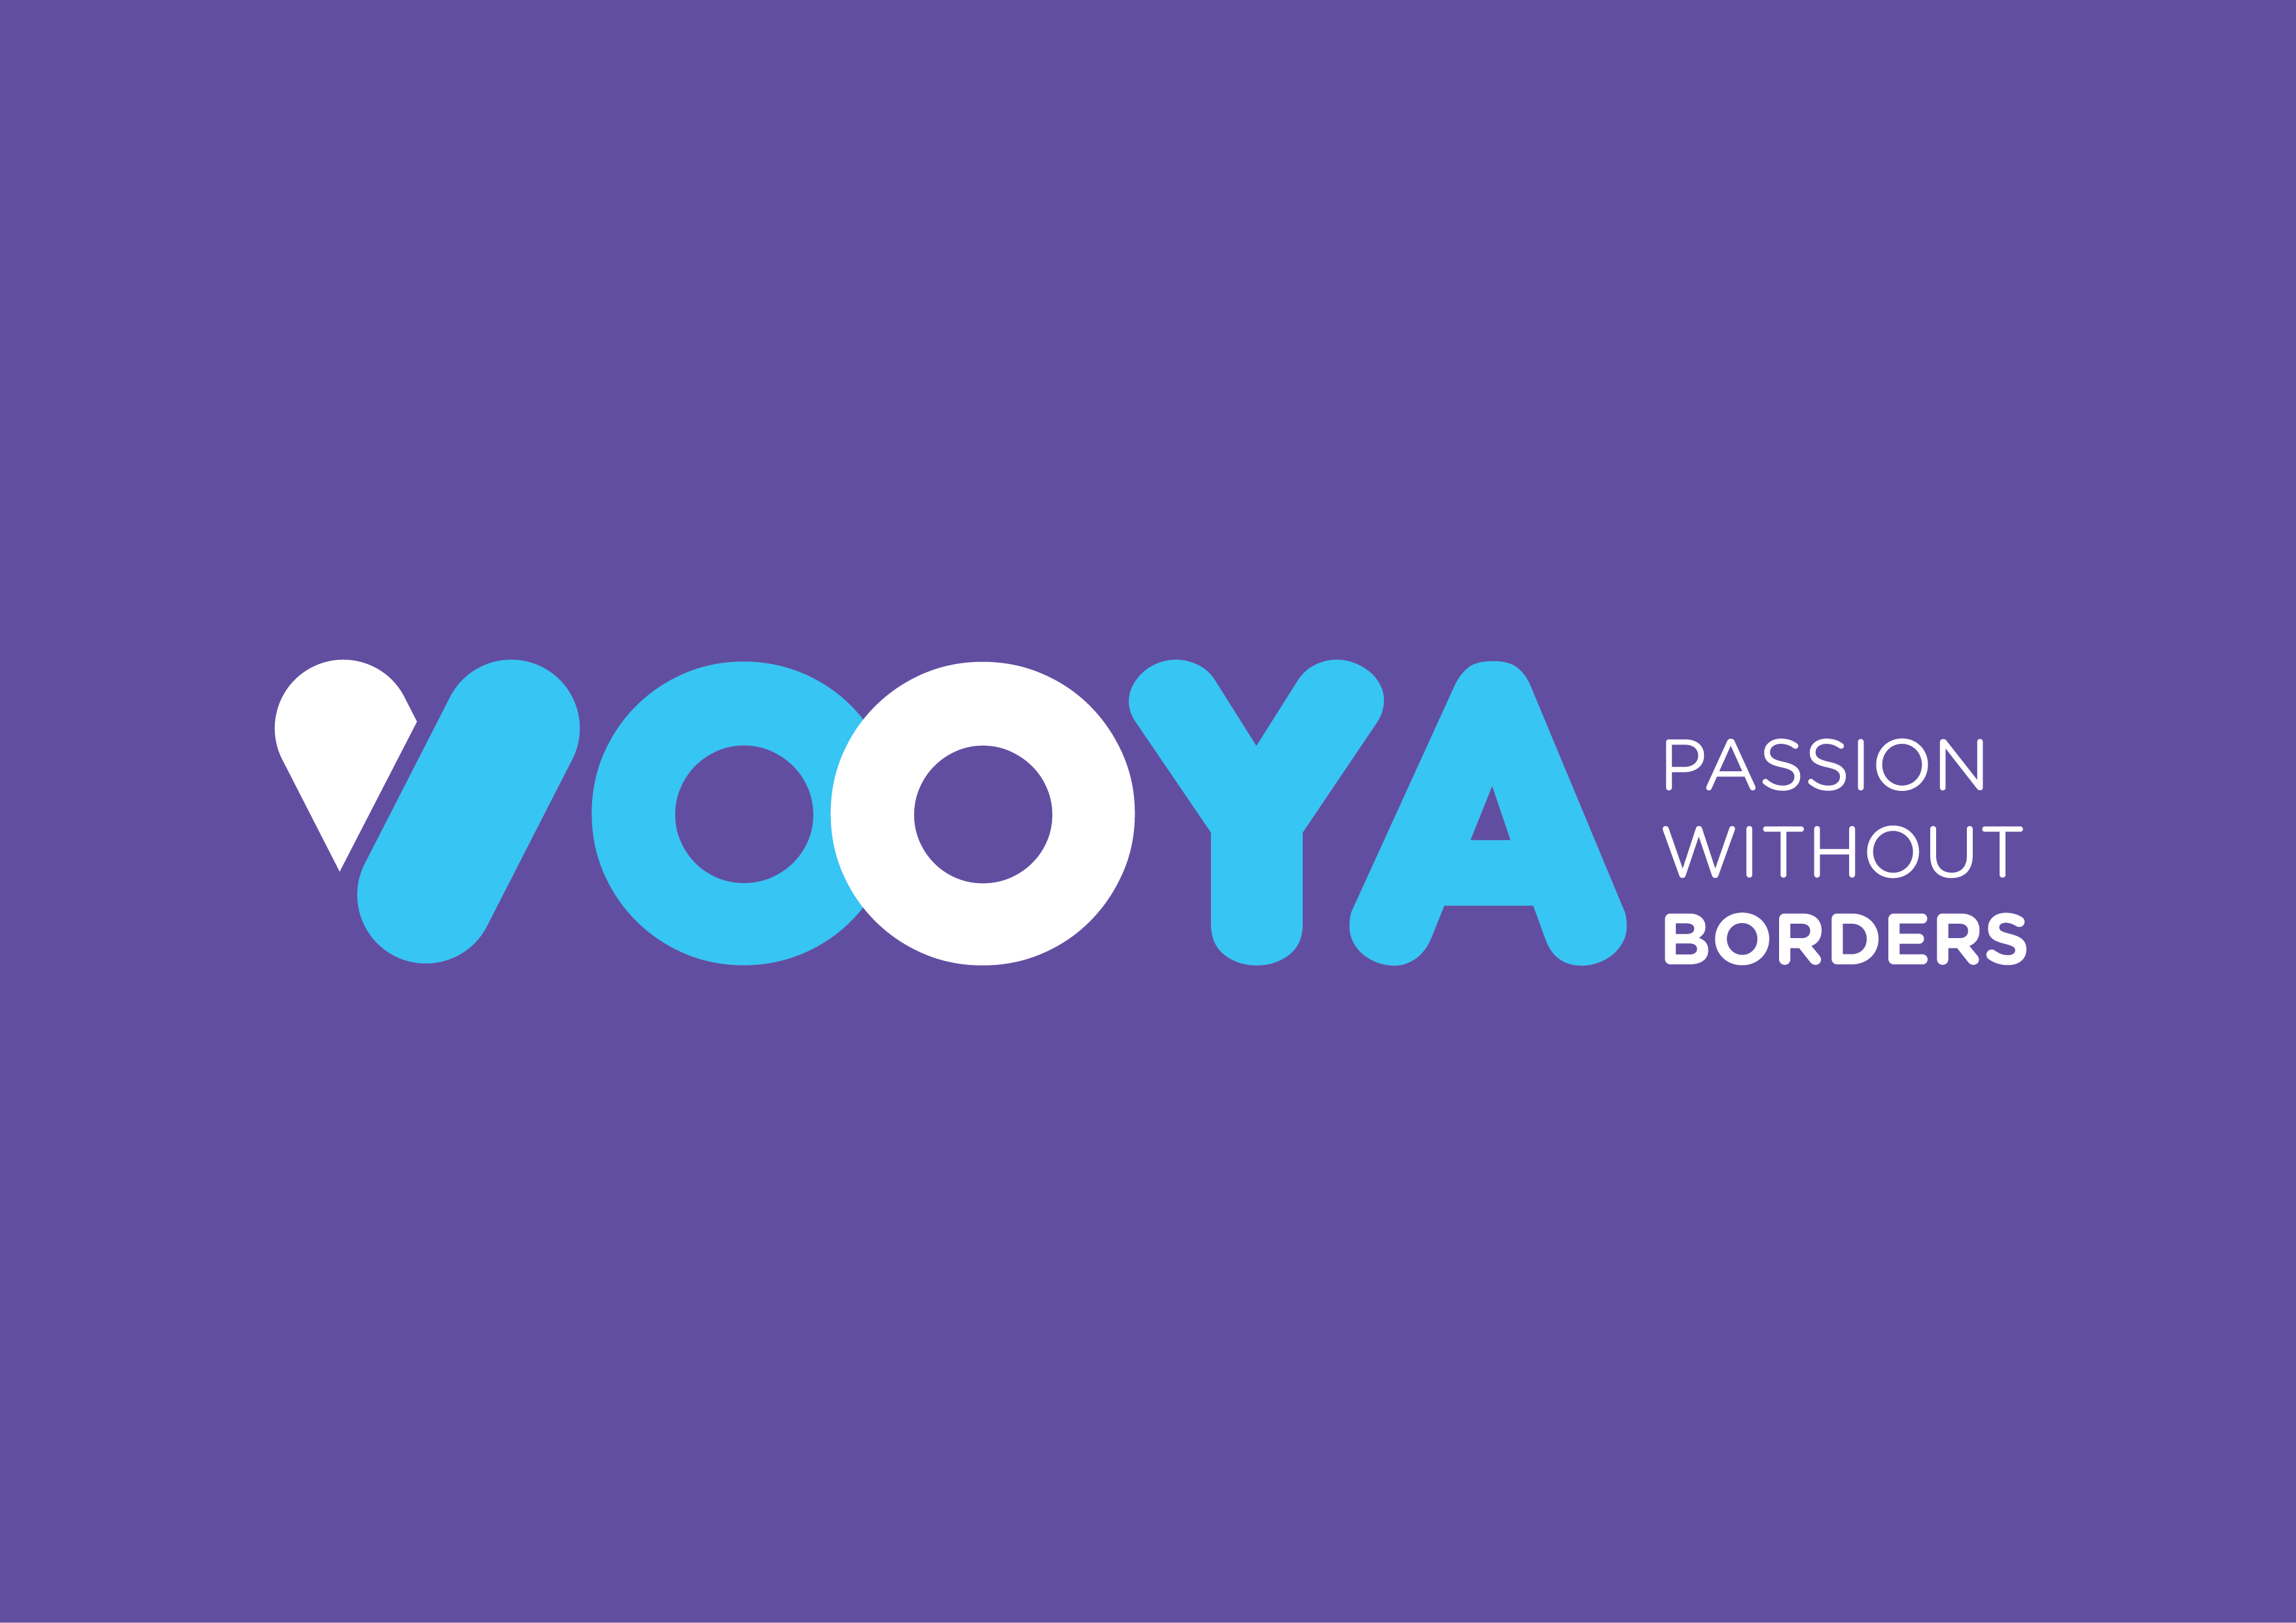 VOOYA - Passion Without Borders